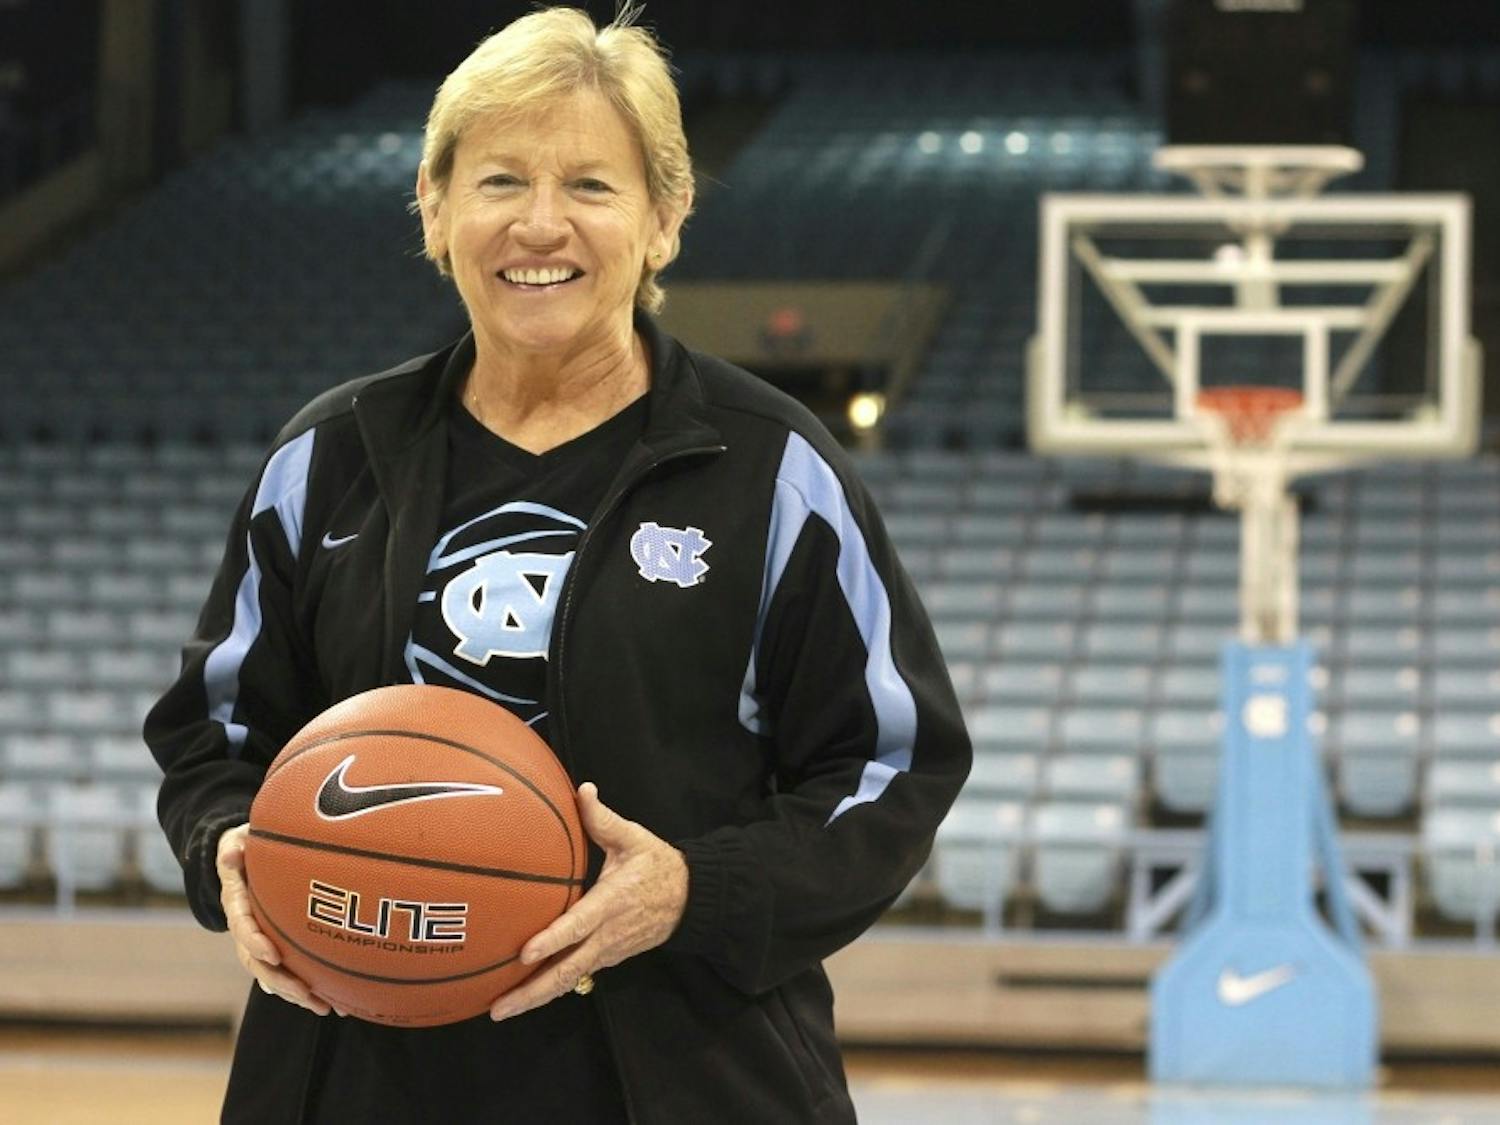 Sylvia Hatchell posed for this potrait ahead of the 2014 season opener, her first game back as UNC's head coach after a battle with leukemia.